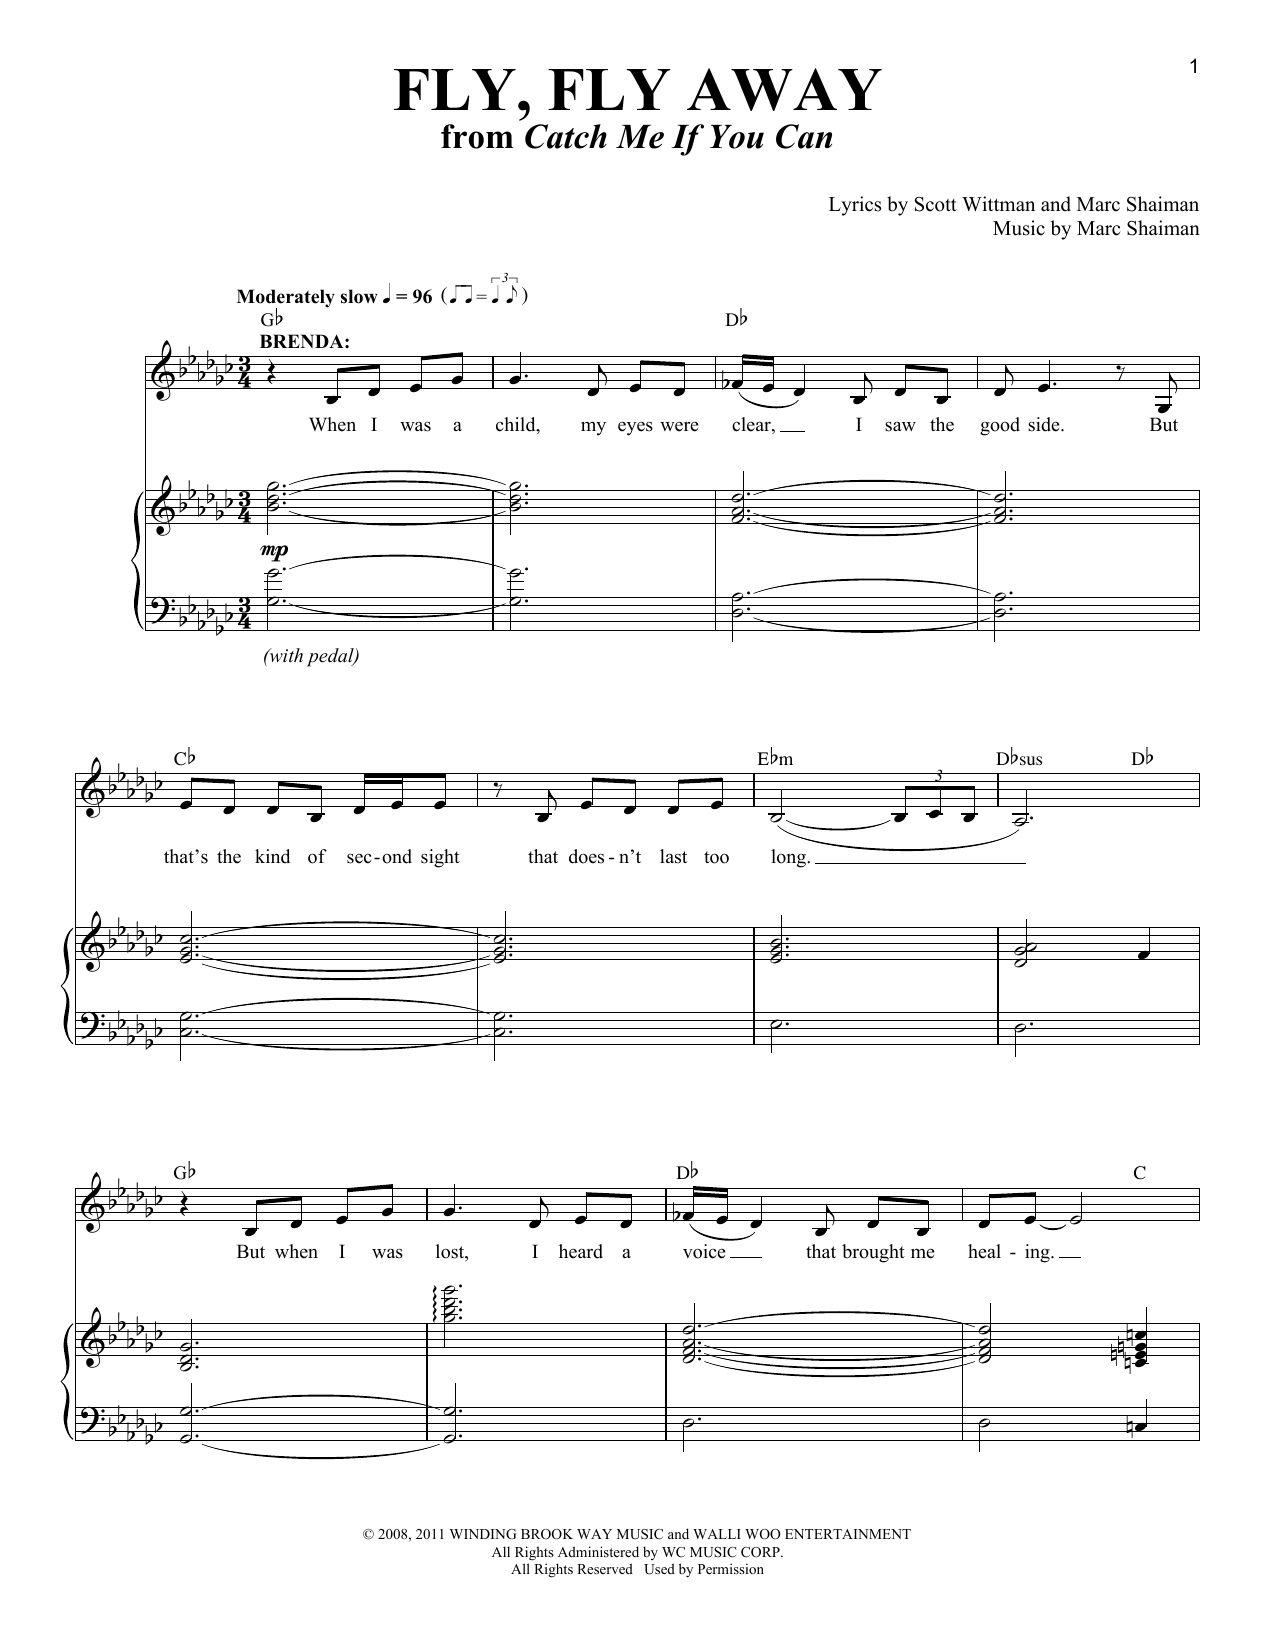 Download Scott Wittman and Marc Shaiman Fly, Fly Away (from Catch Me If You Can Sheet Music